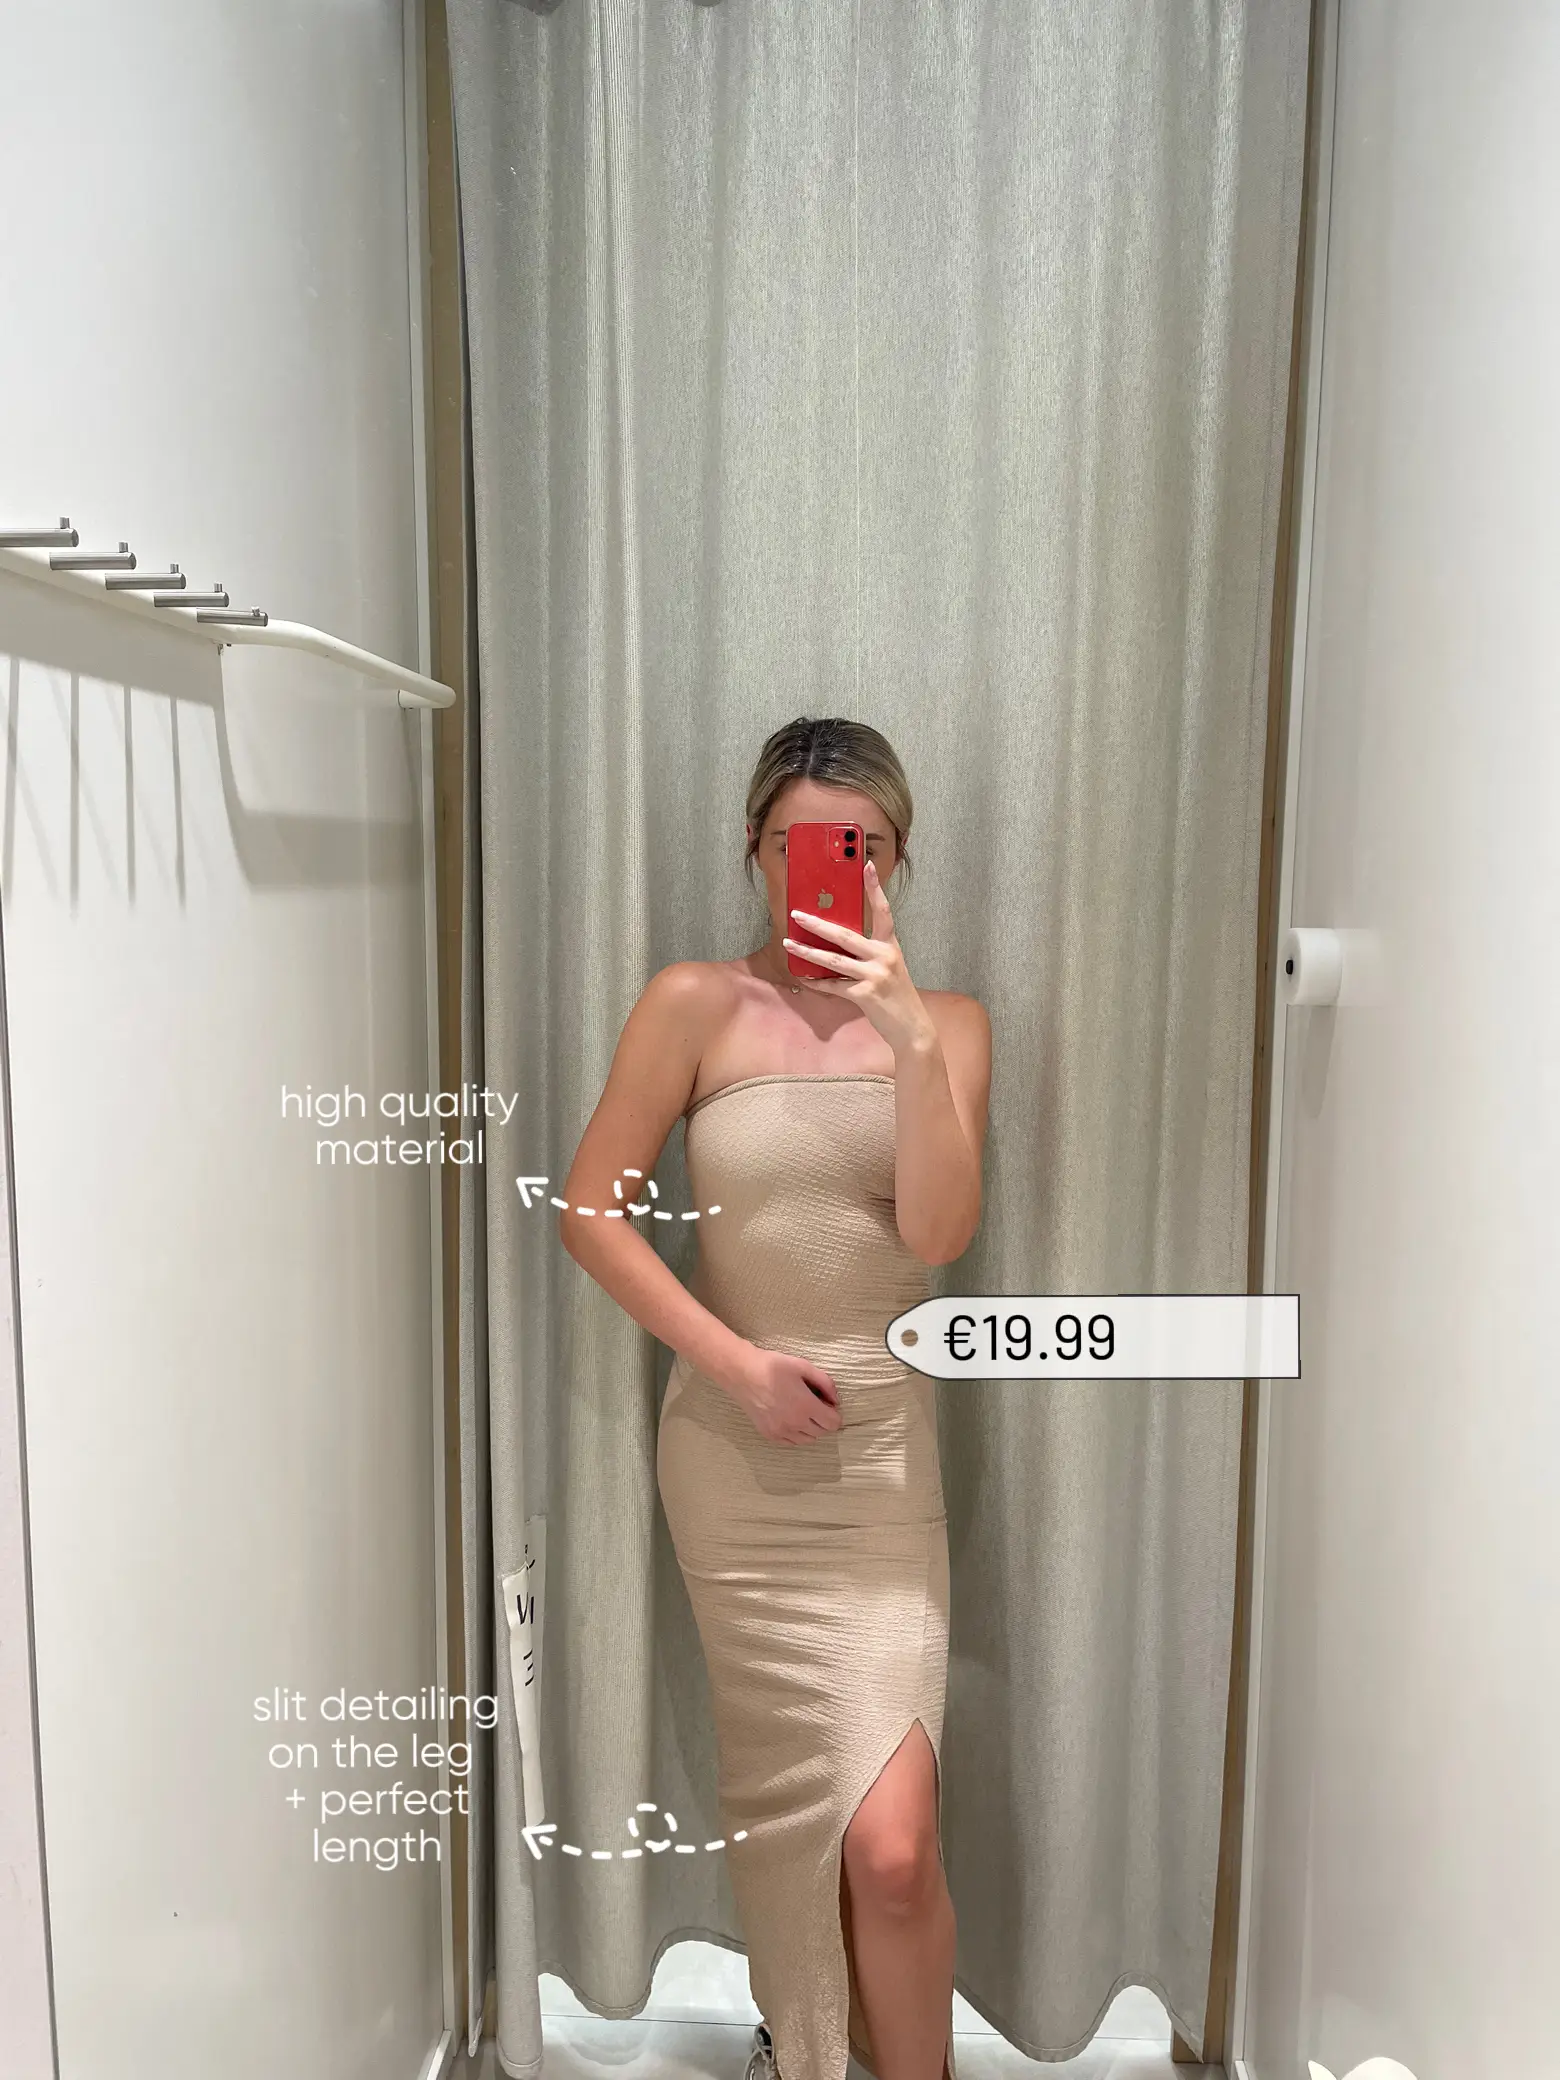 WHICH BERSHKA DRESS SHOULD I BUY? 💗, Gallery posted by keirabuckley